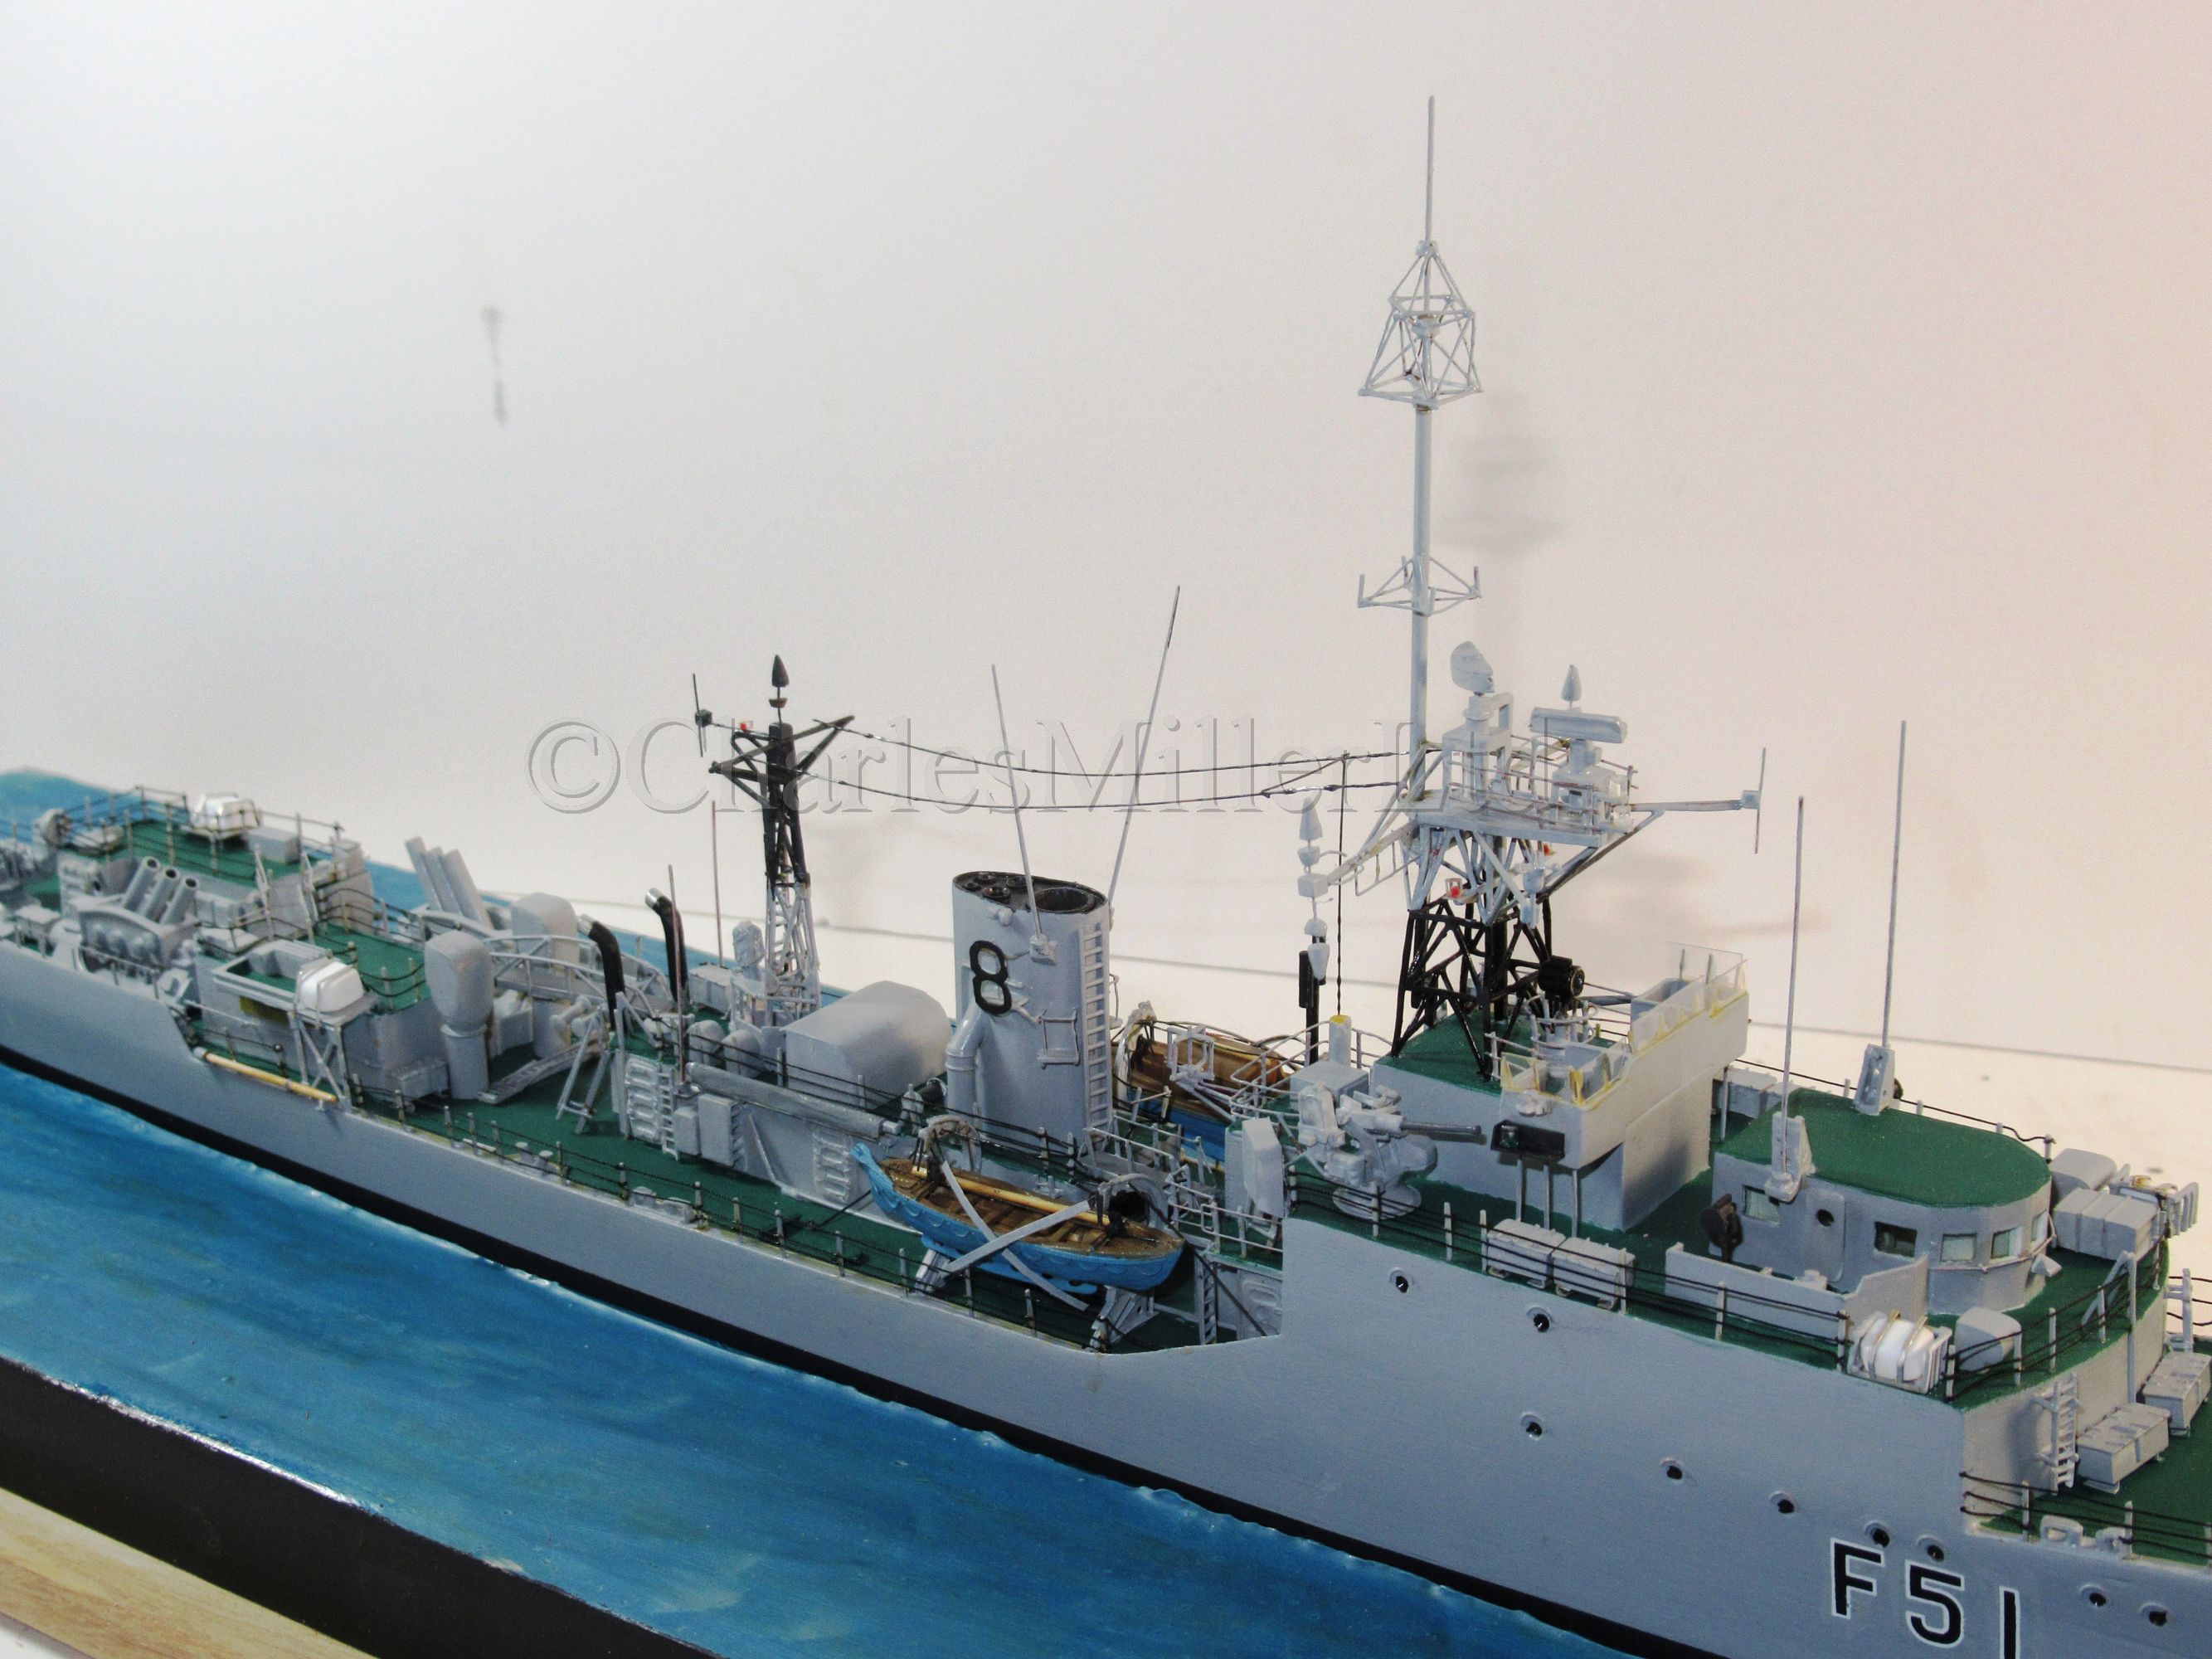 A 1:192 WATERLINE MODEL FOR THE TYPE 14 BLACKWOOD CLASS FRIGATE HMS GRAFTON (F51), AS FITTED IN - Image 6 of 14